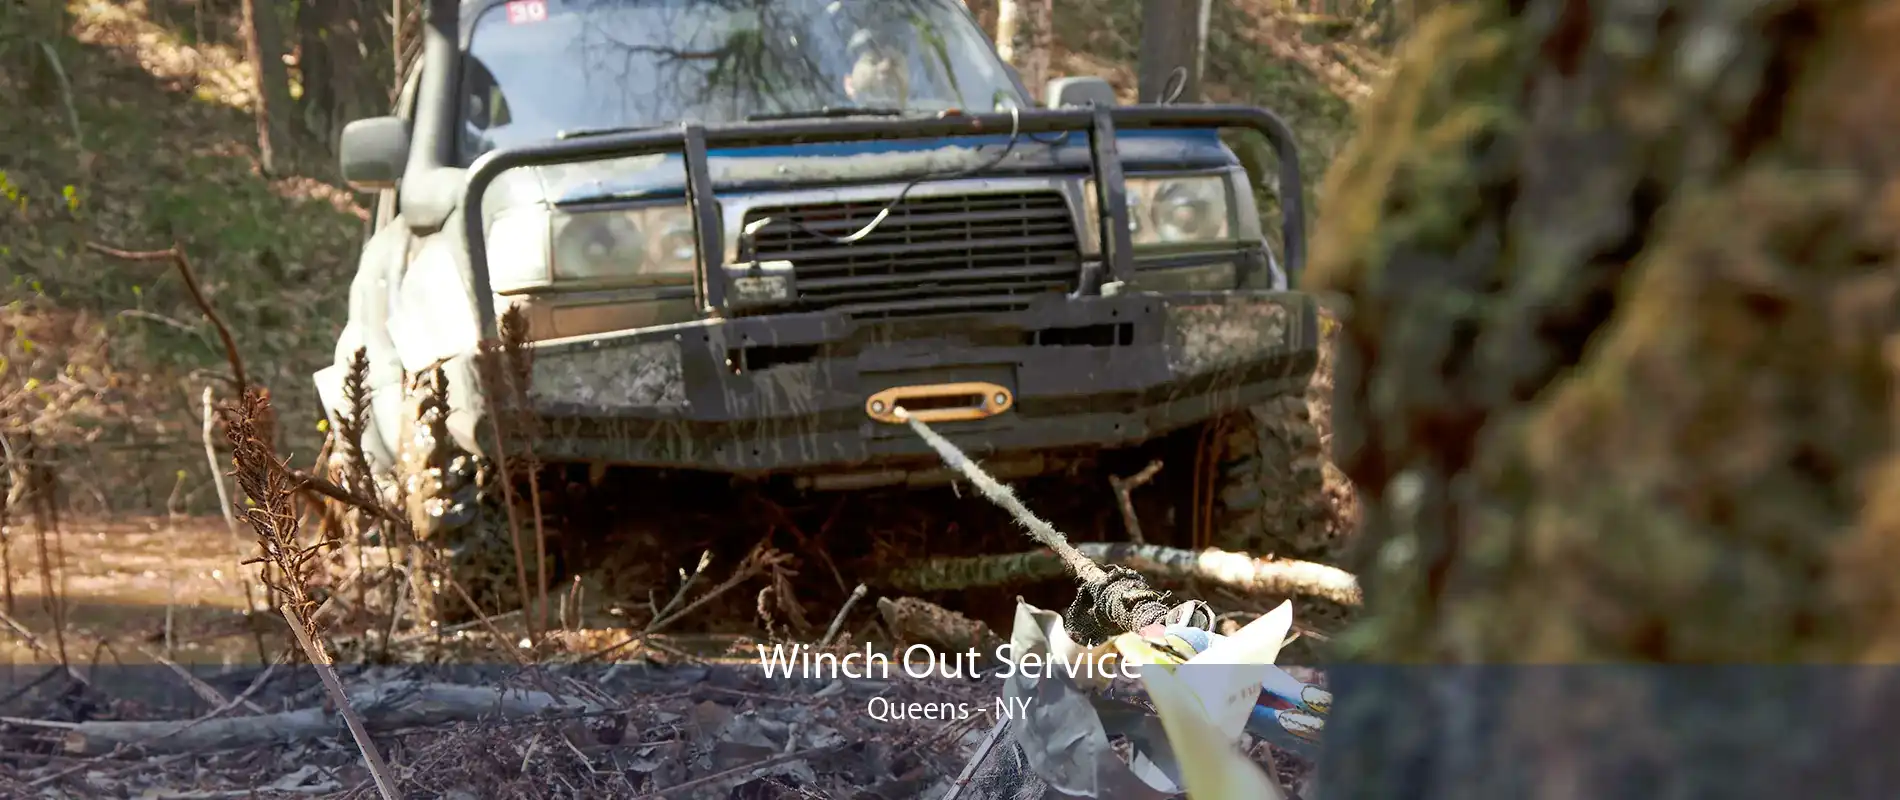 Winch Out Service Queens - NY